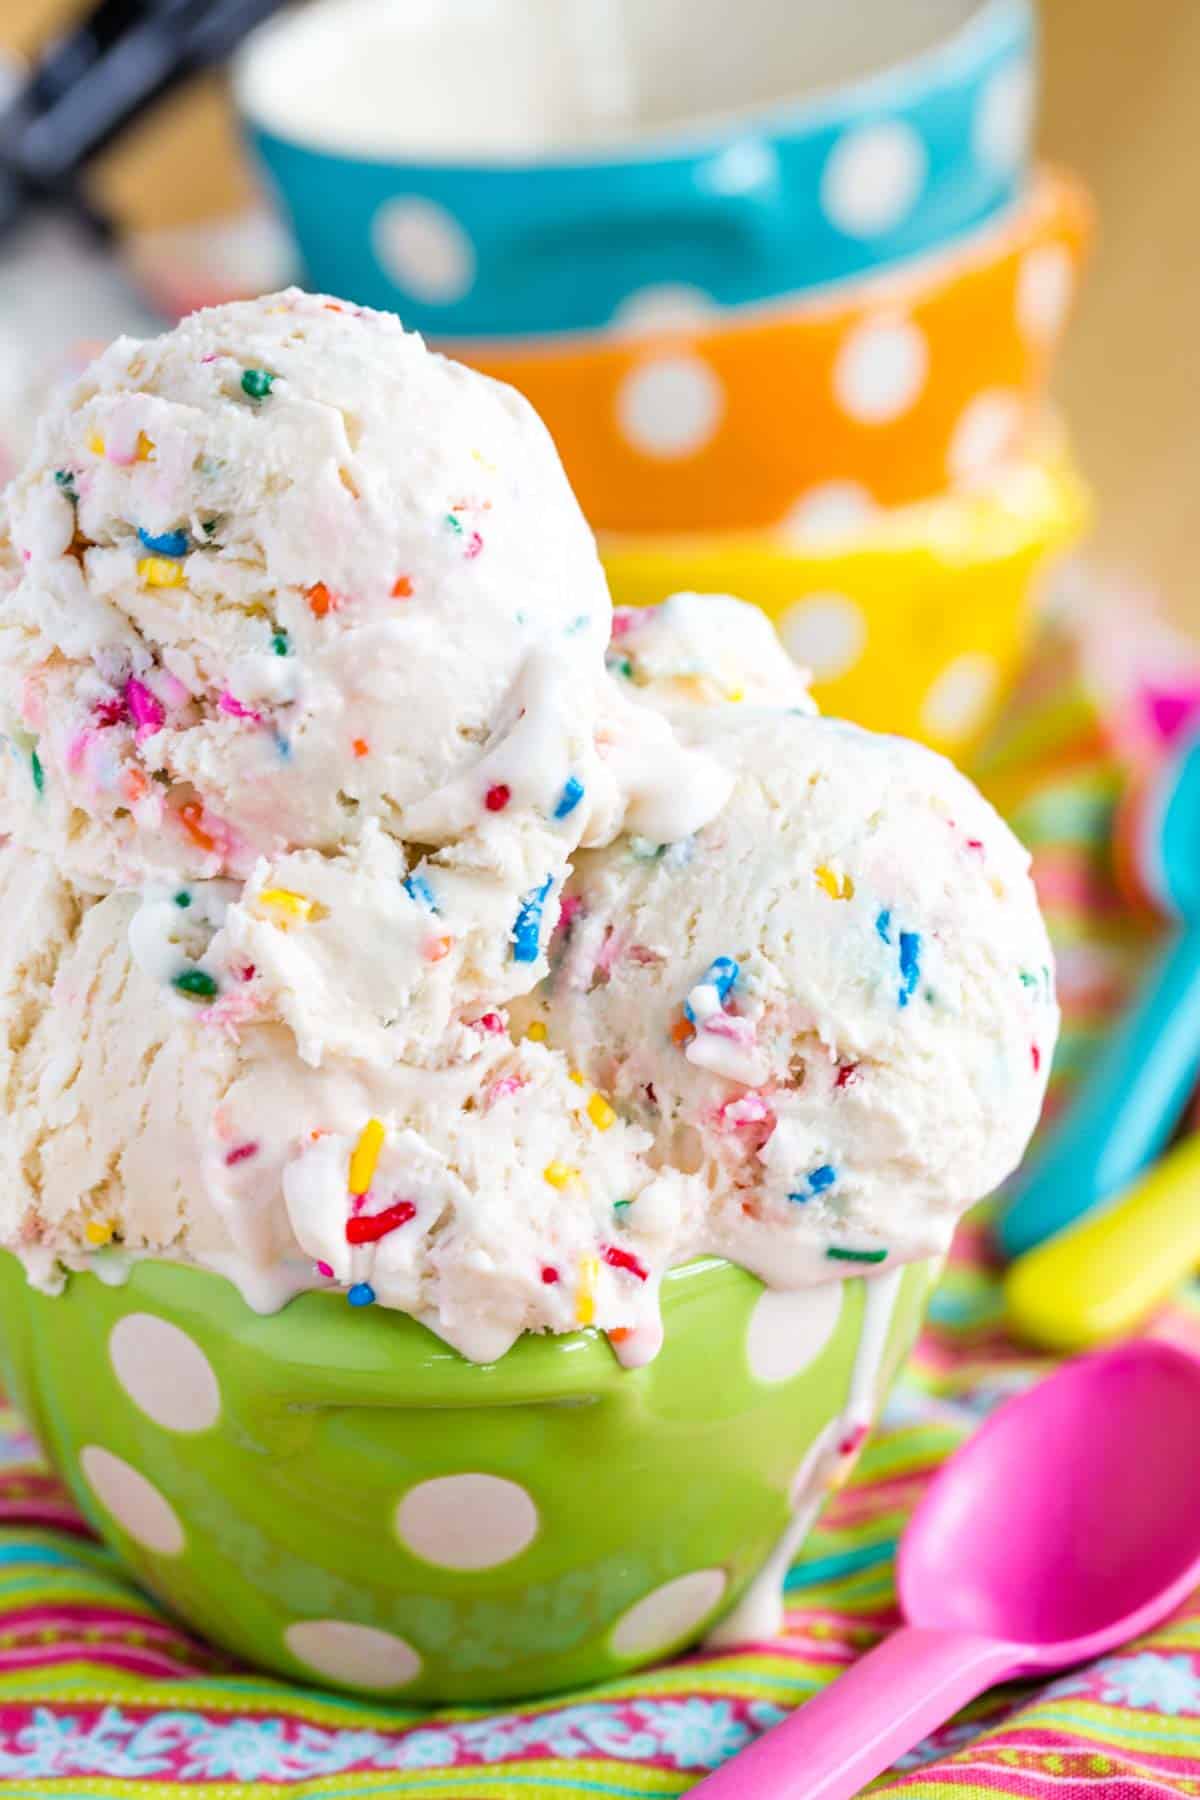 Funfetti Cake Batter Ice Cream in a green polka dot bowl with a pink plastic spoon next to it.